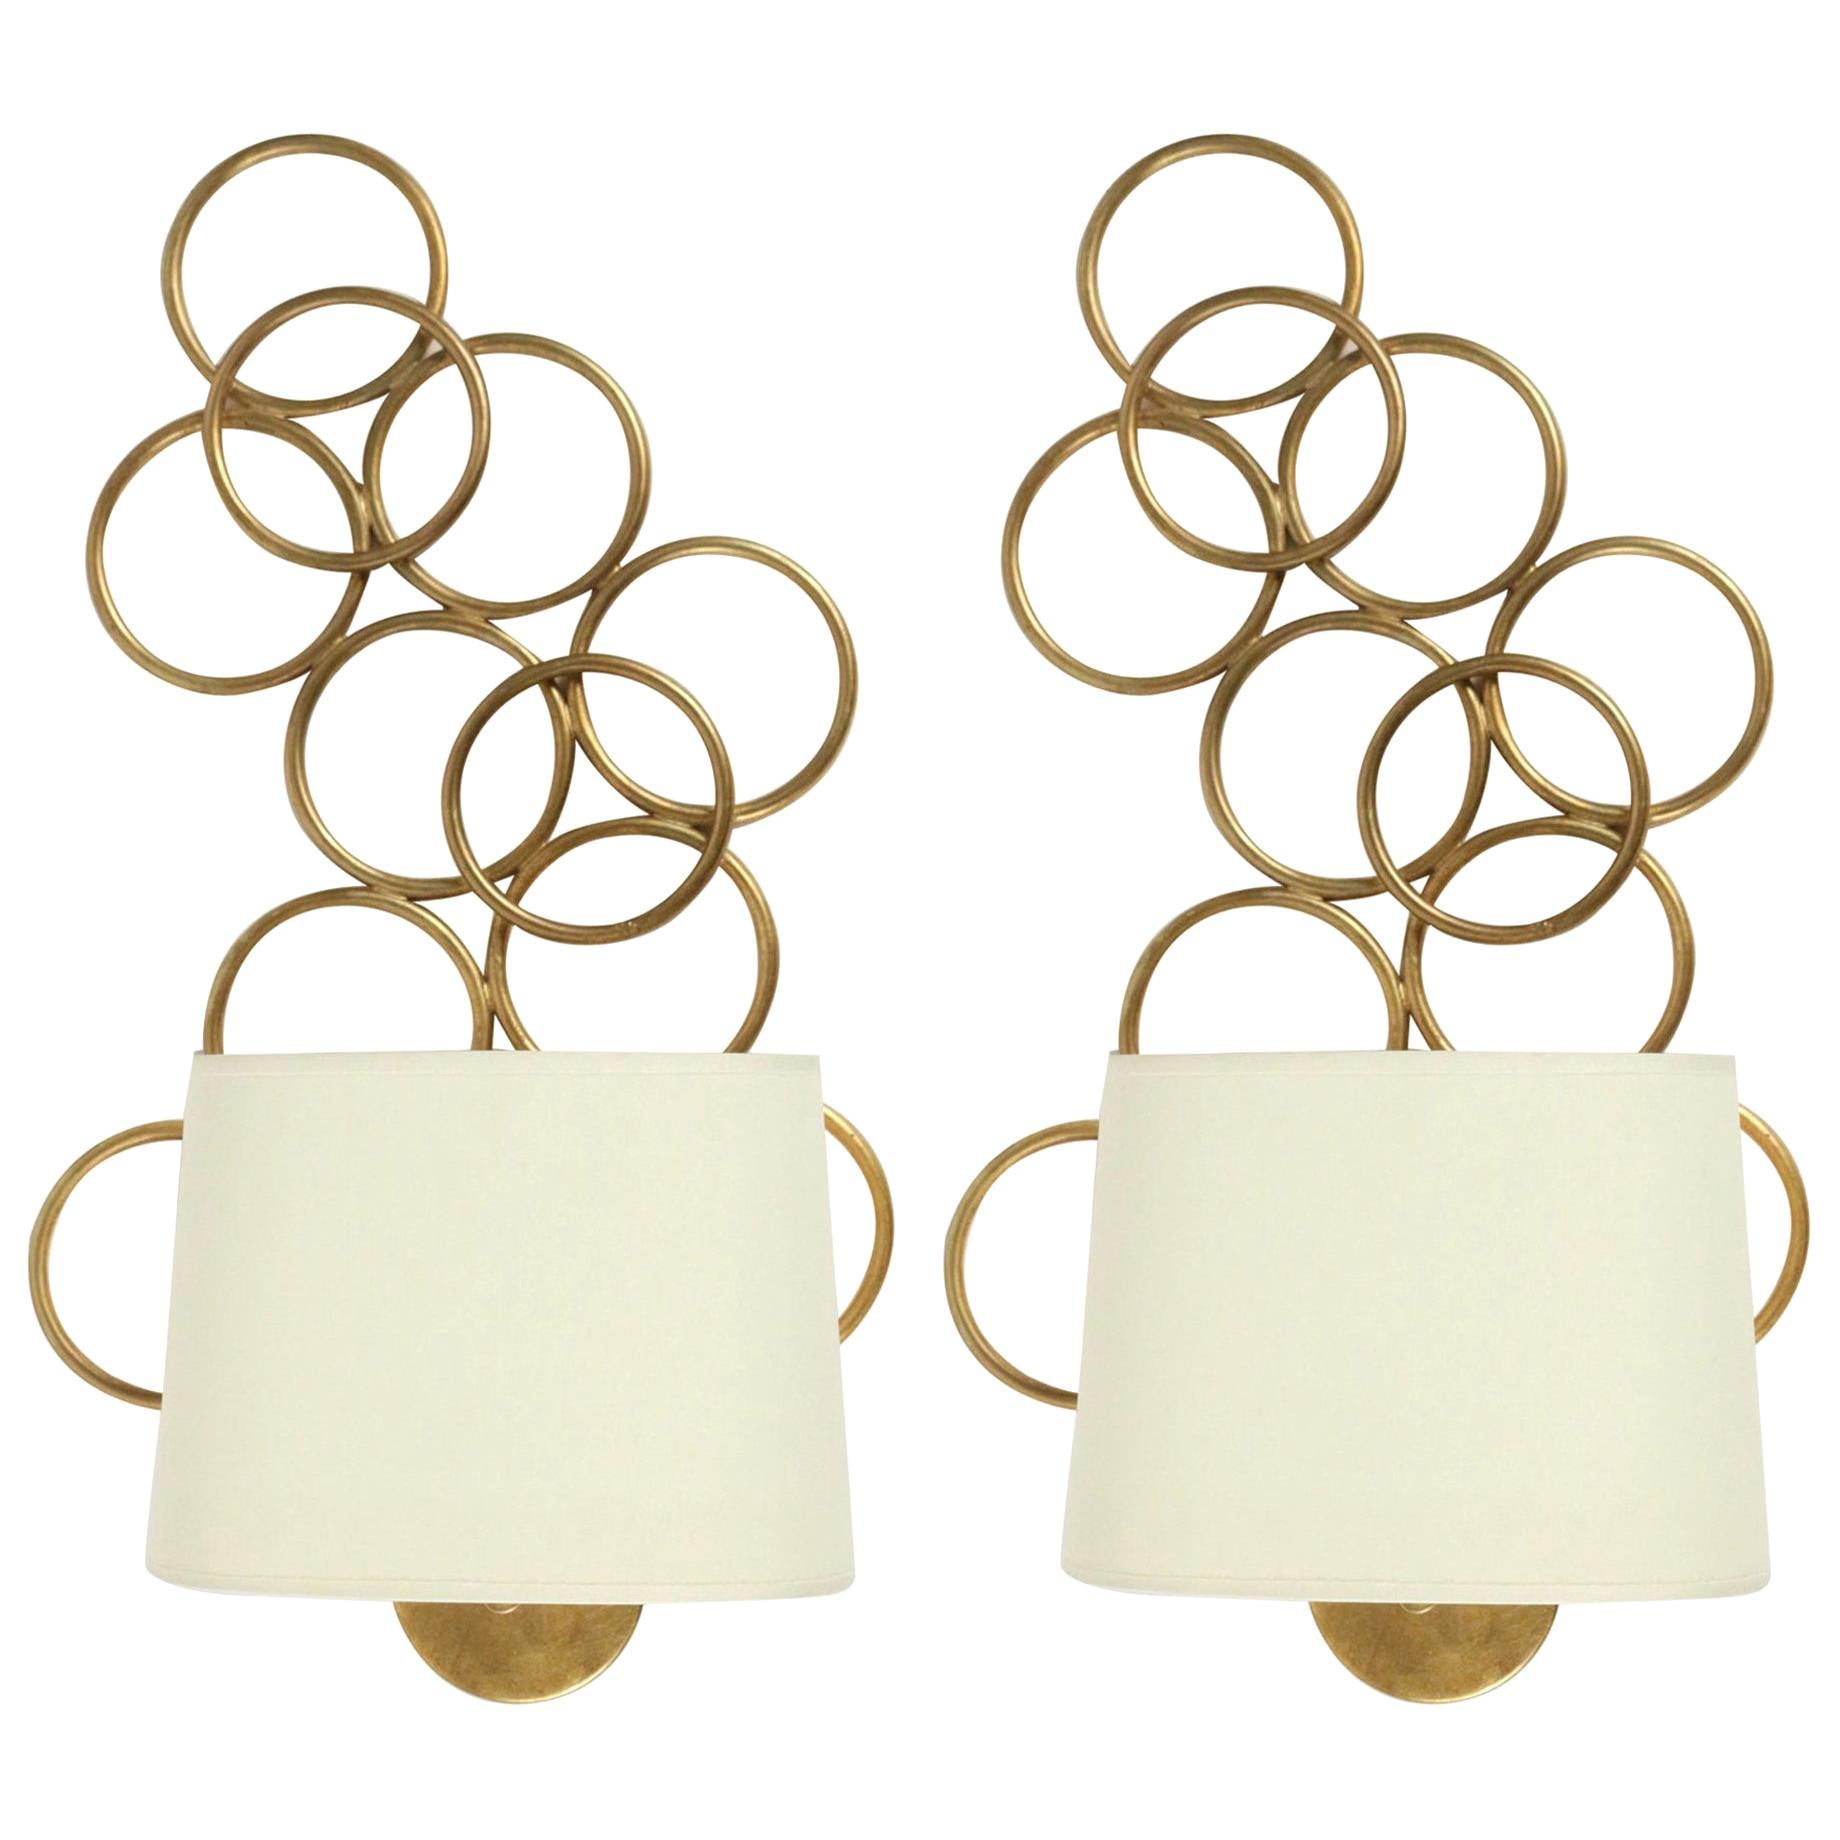 1960 Paire d'appliques Maison FlorArt
Composed of a round wall support on which rests on the lower part the arm of light dressed with off-white cotton lampshade of oval shape.
On the top the wall lamp is decorated with a series of interlaced circle